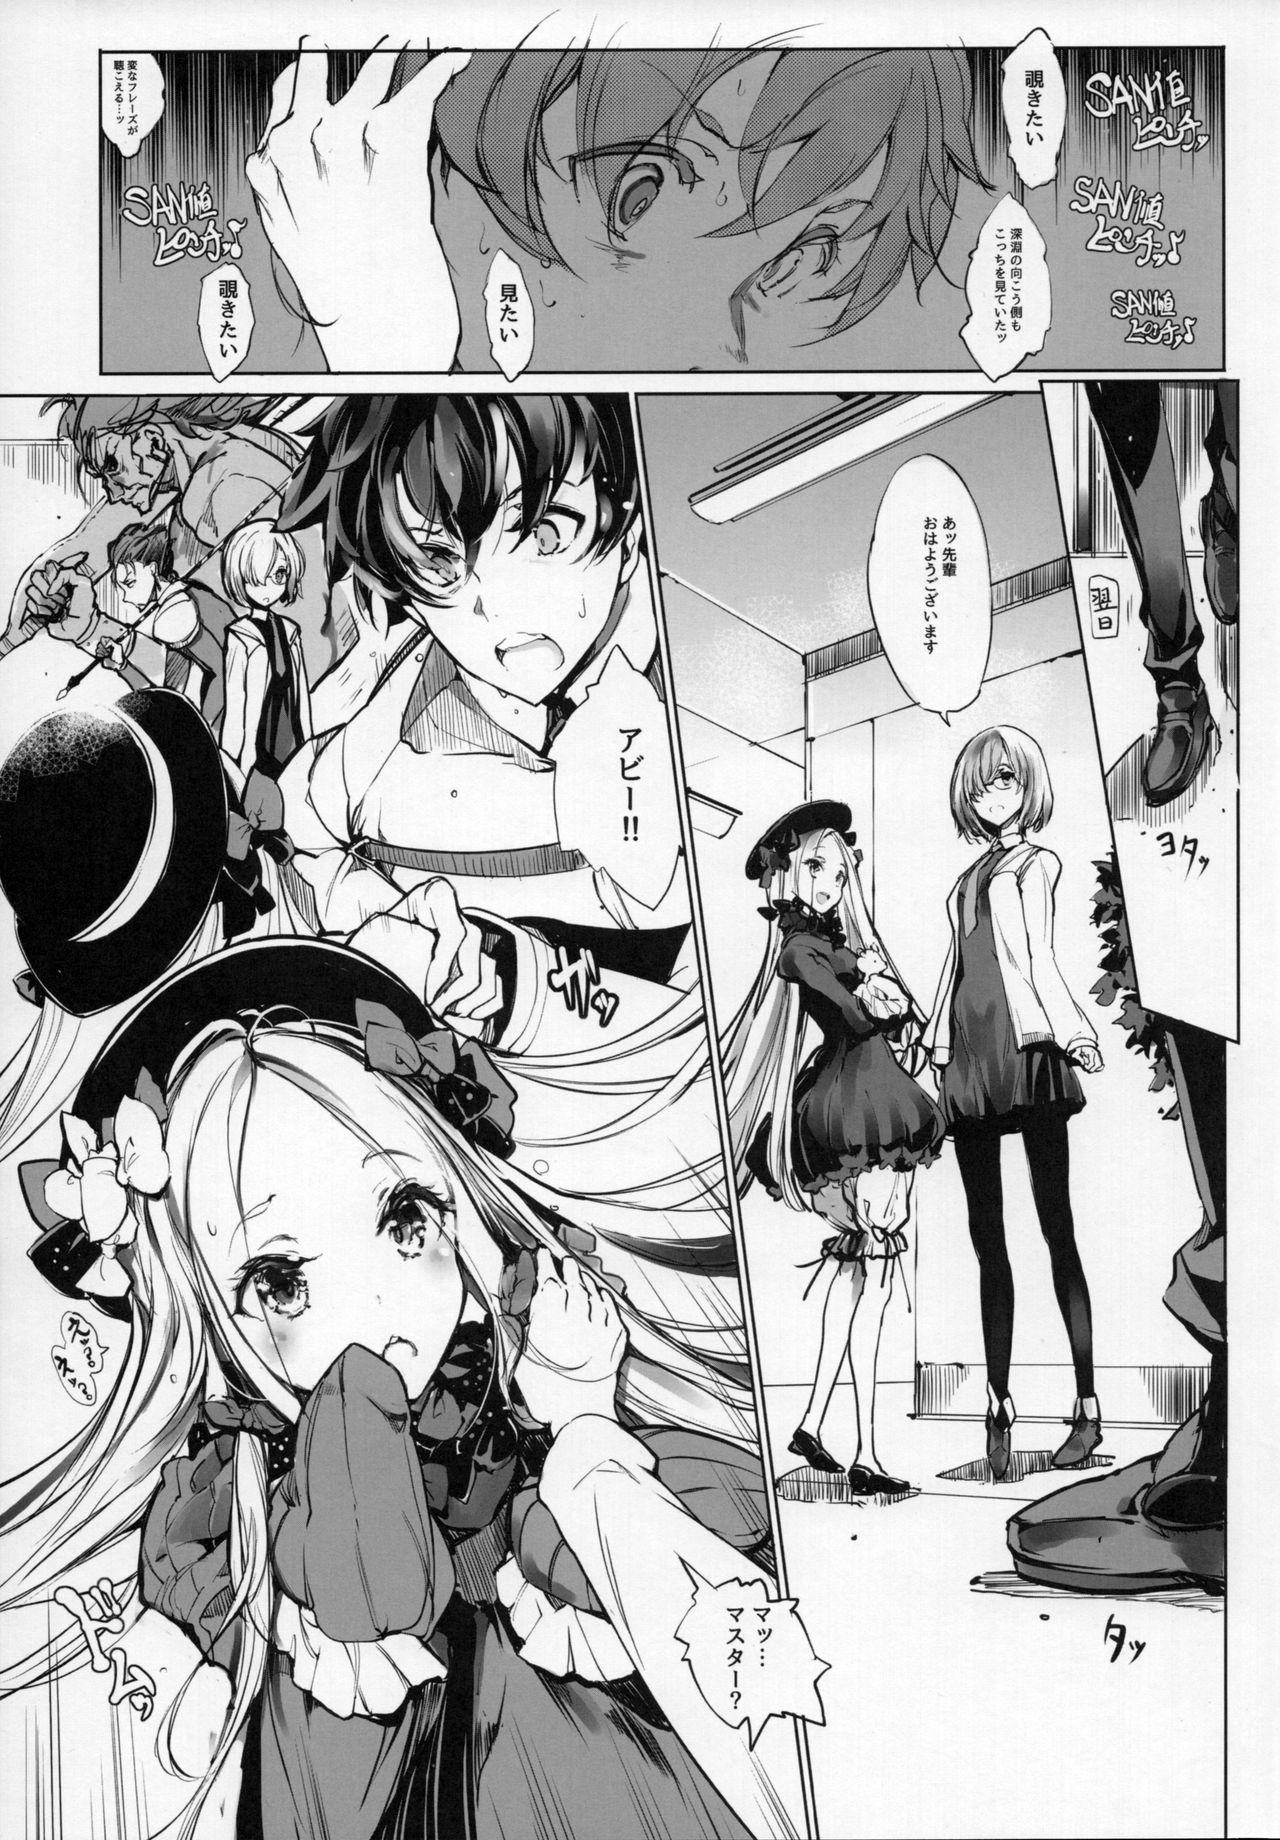 Bathroom Sen no Ko o Haramu Mori no Shoujo - The girl of the woods with a thousand young - Fate grand order Amature Sex Tapes - Page 6